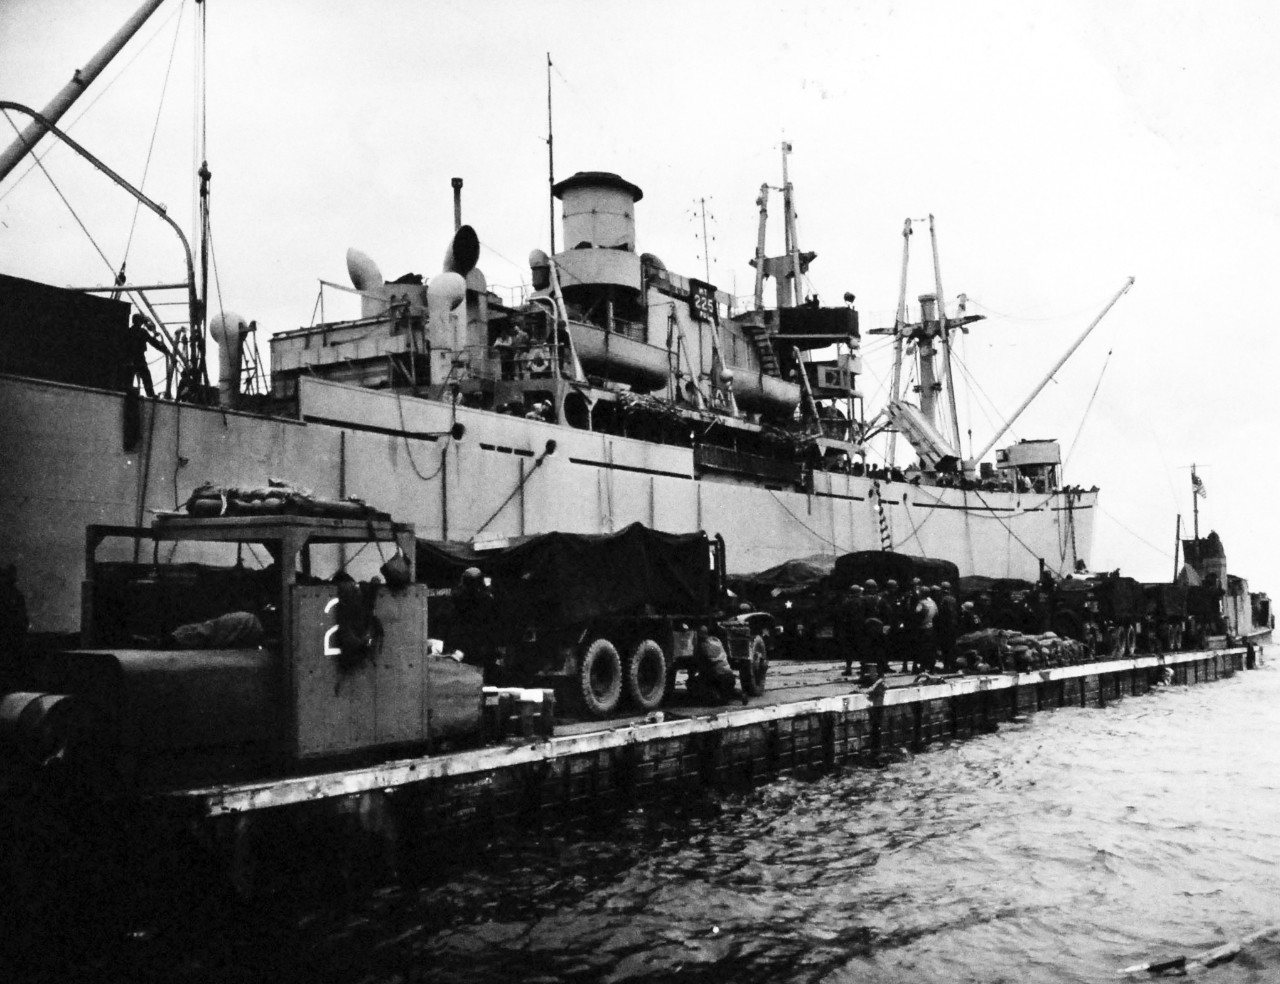 80-G-252653:  Normandy Invasion, Rhino Ferry, June 1944.    A Rhino barge, married to a transport off the French coast, takes on a load of trucks and troops to reinforce armies moving inland, 10 June 1944.   Official U.S. Navy Photograph, now in the collections of the National Archives.   (2014/10/28). 